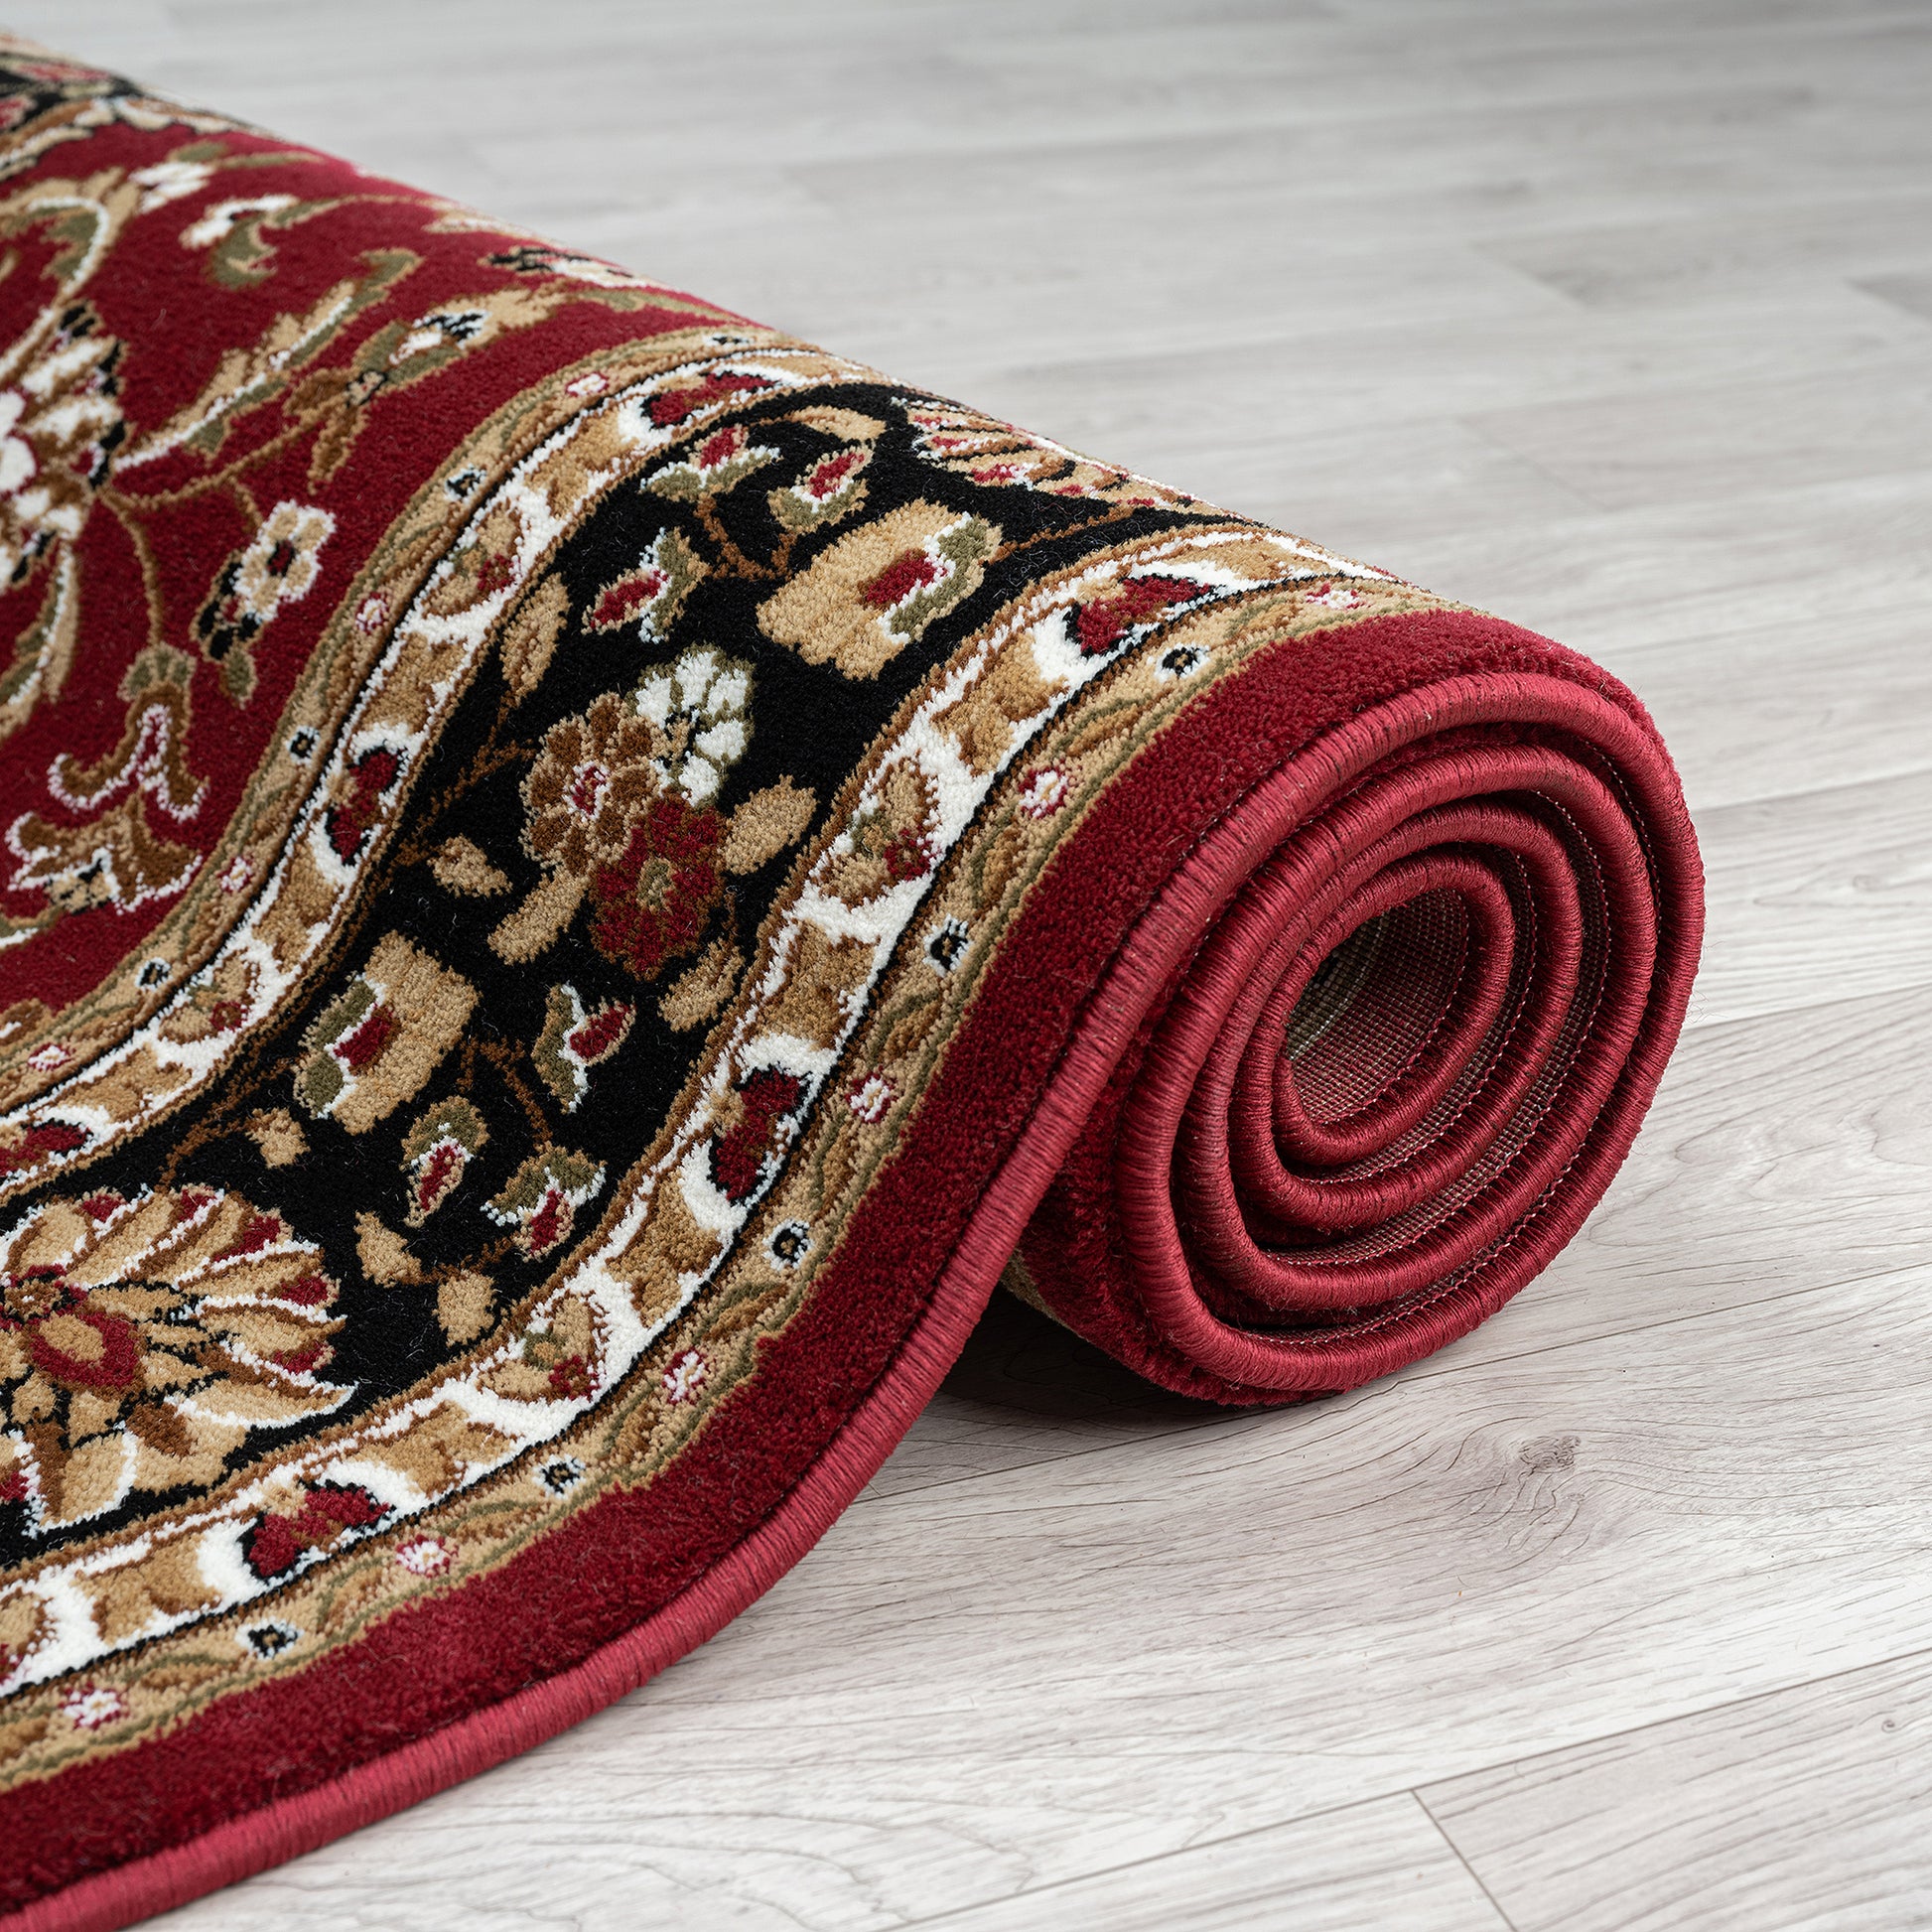 Empire 524 Red Rug Saray Rugs